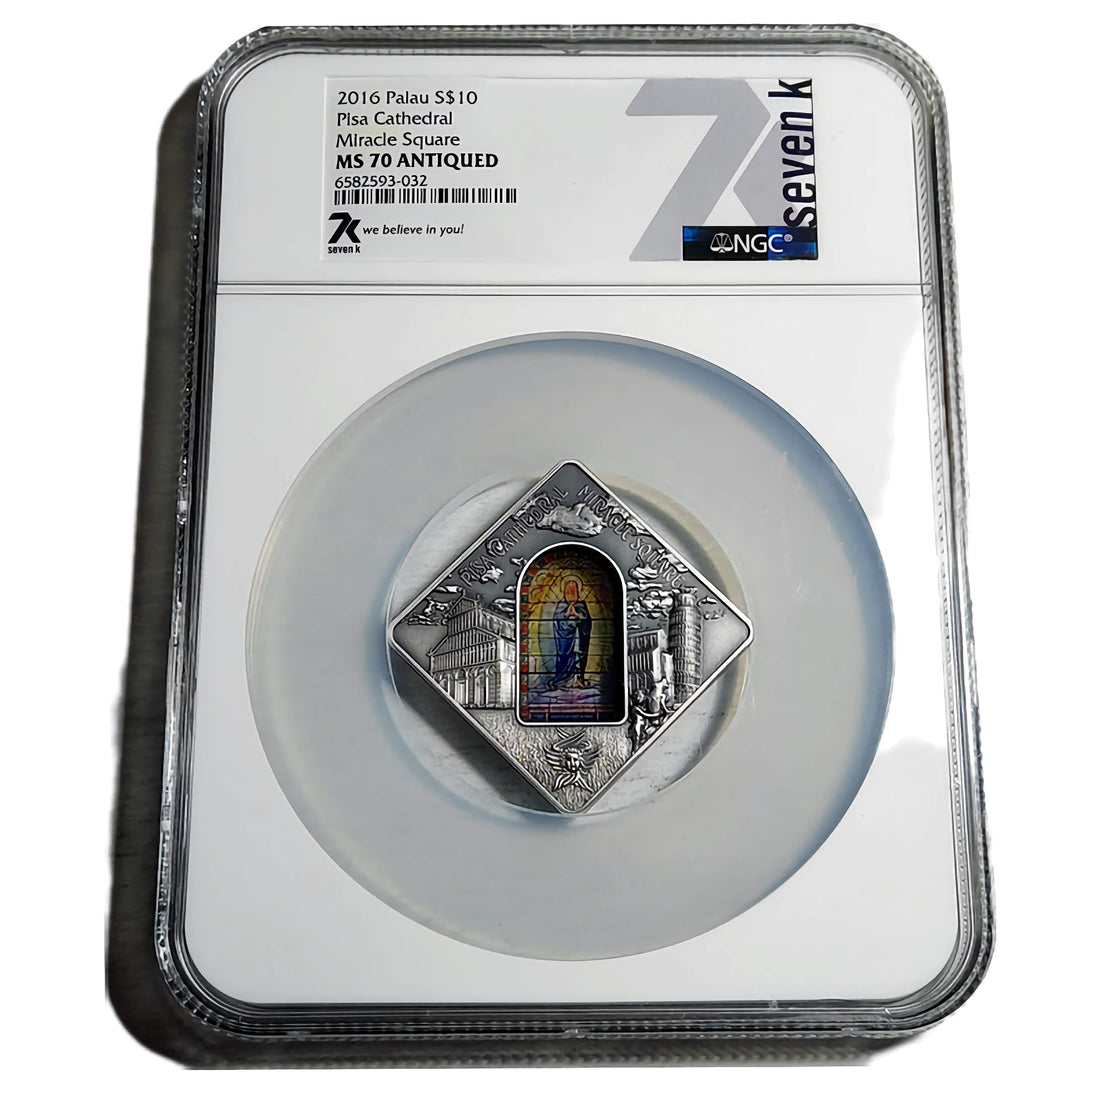 2016 50 g PISA CATHEDRAL Silver Coin MS 70 Sacred Art - Palau - OZB